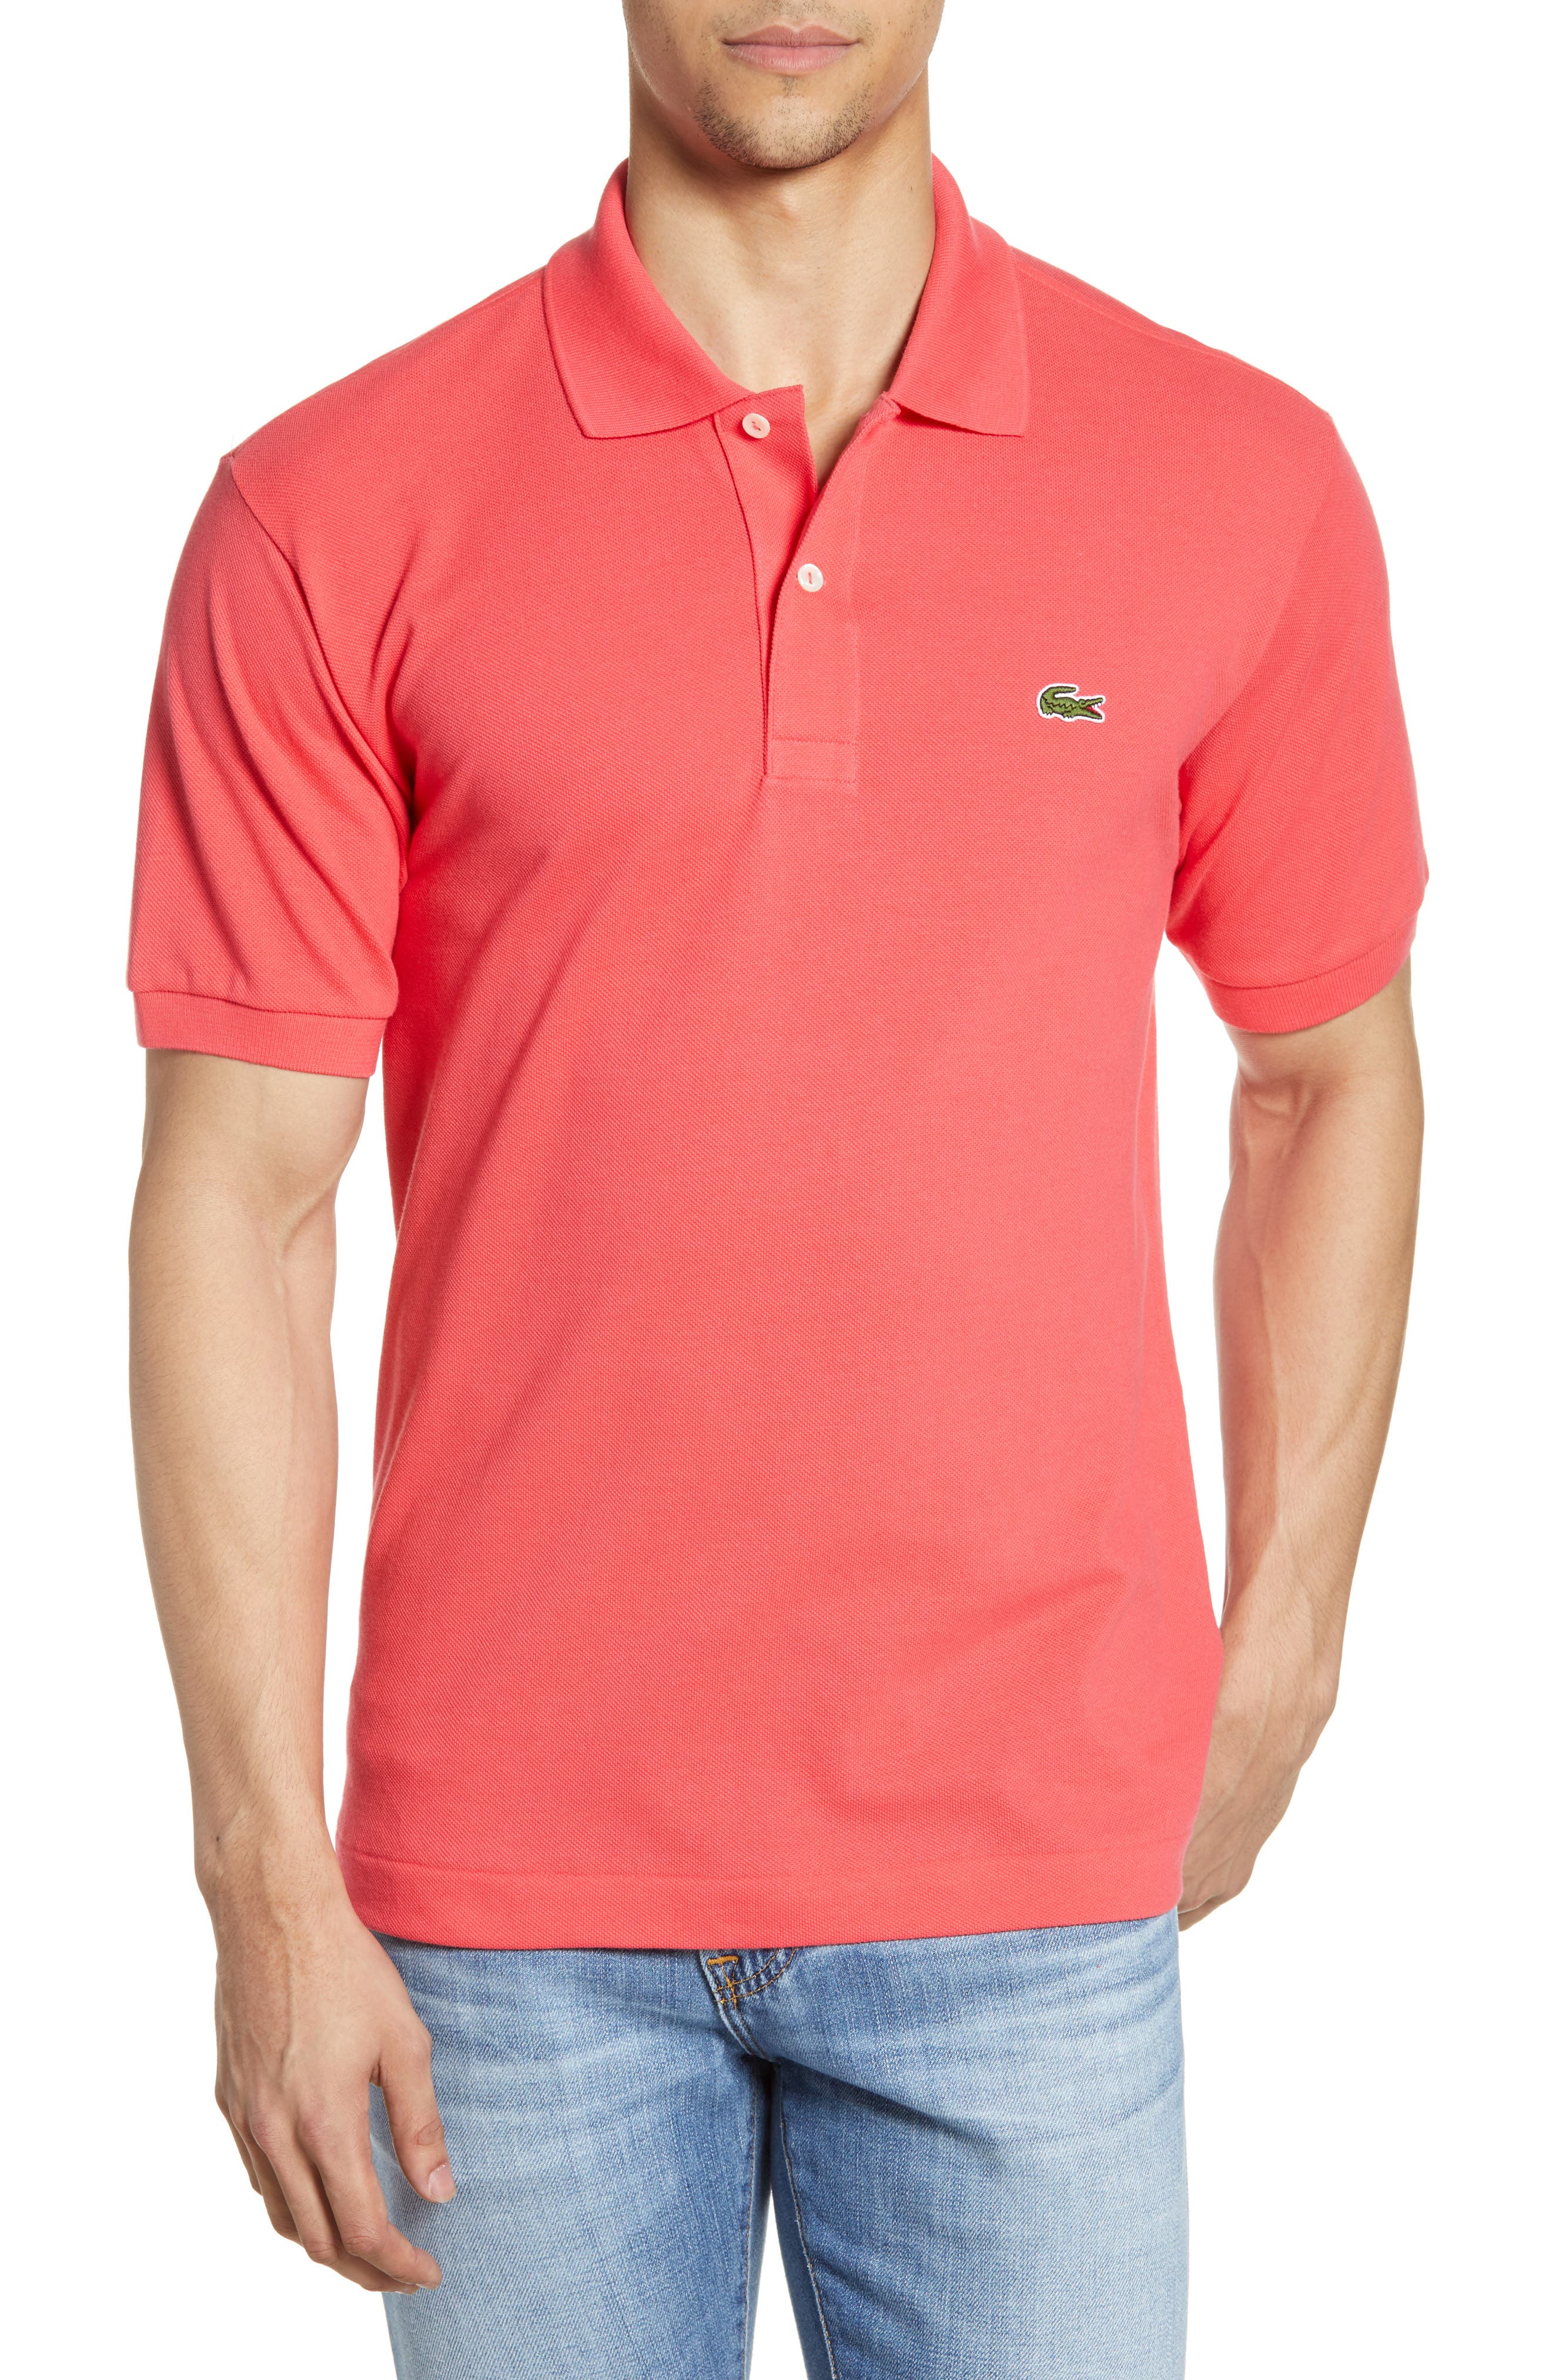 lacoste sirop pink